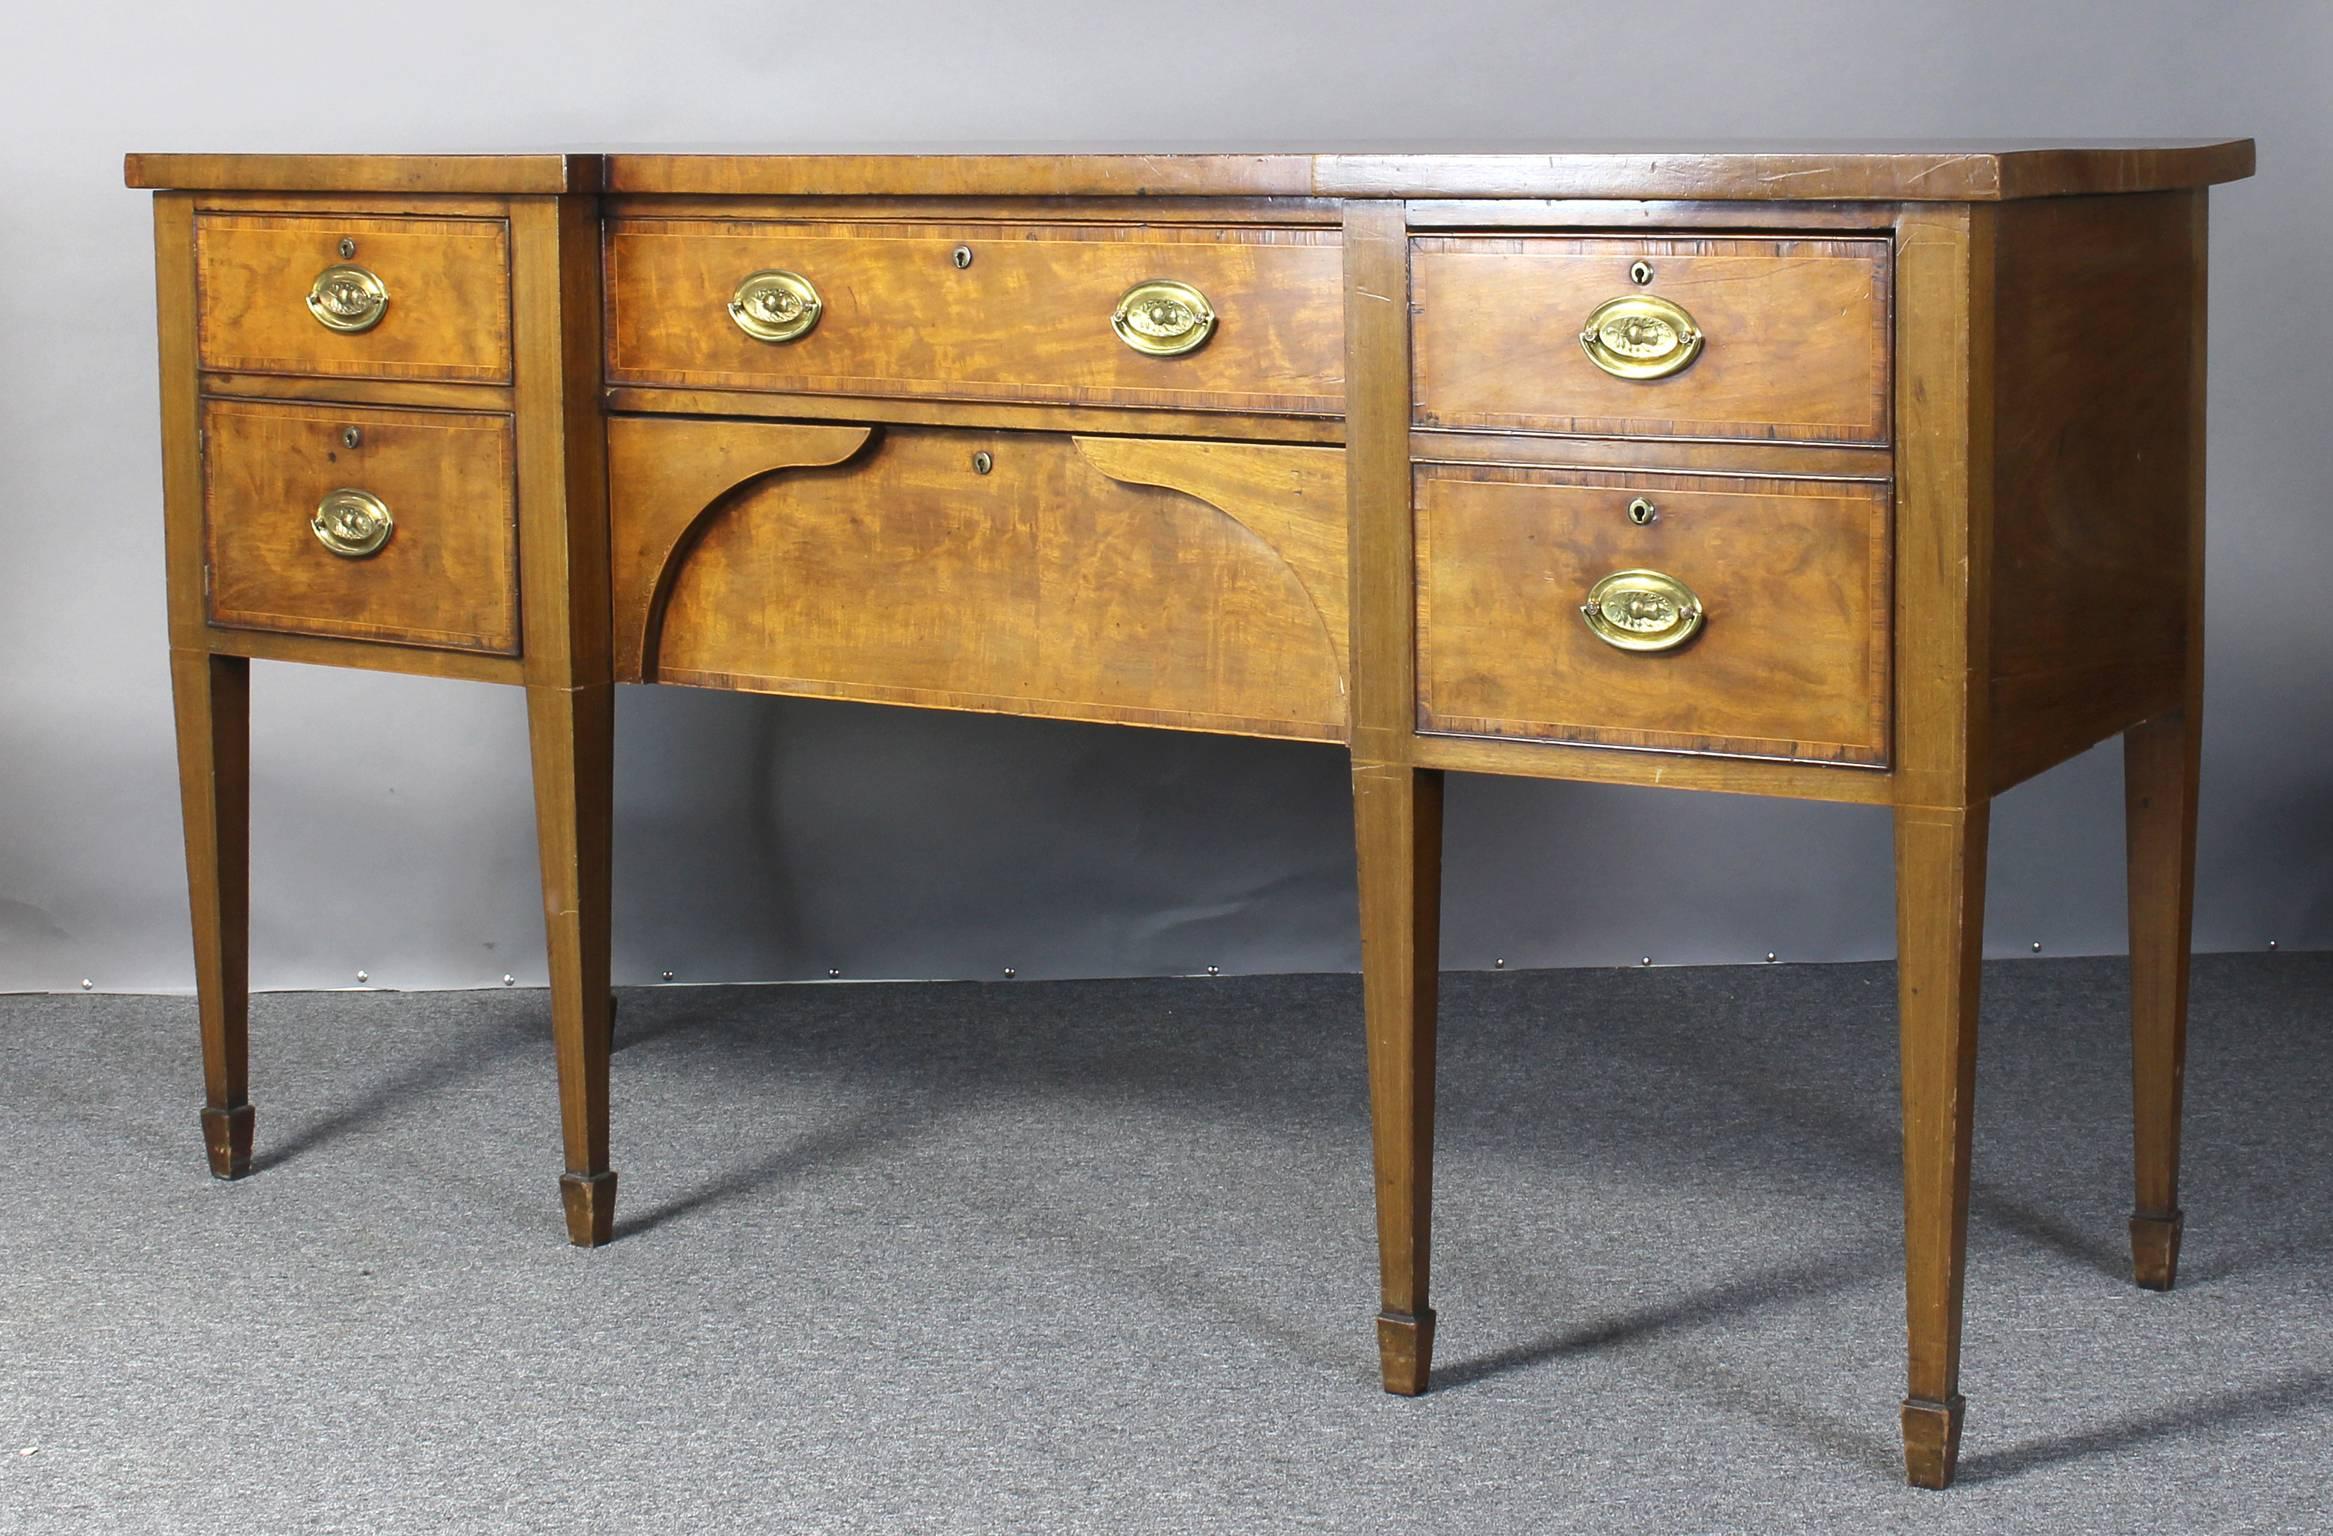 An early 19th century Scottish mahogany sideboard with ebony and rosewood cross banding, four drawers including a cellaret cabinet and an unusual false drawer hinged cabinet, supported on square tapering legs and spade feet with original thistle